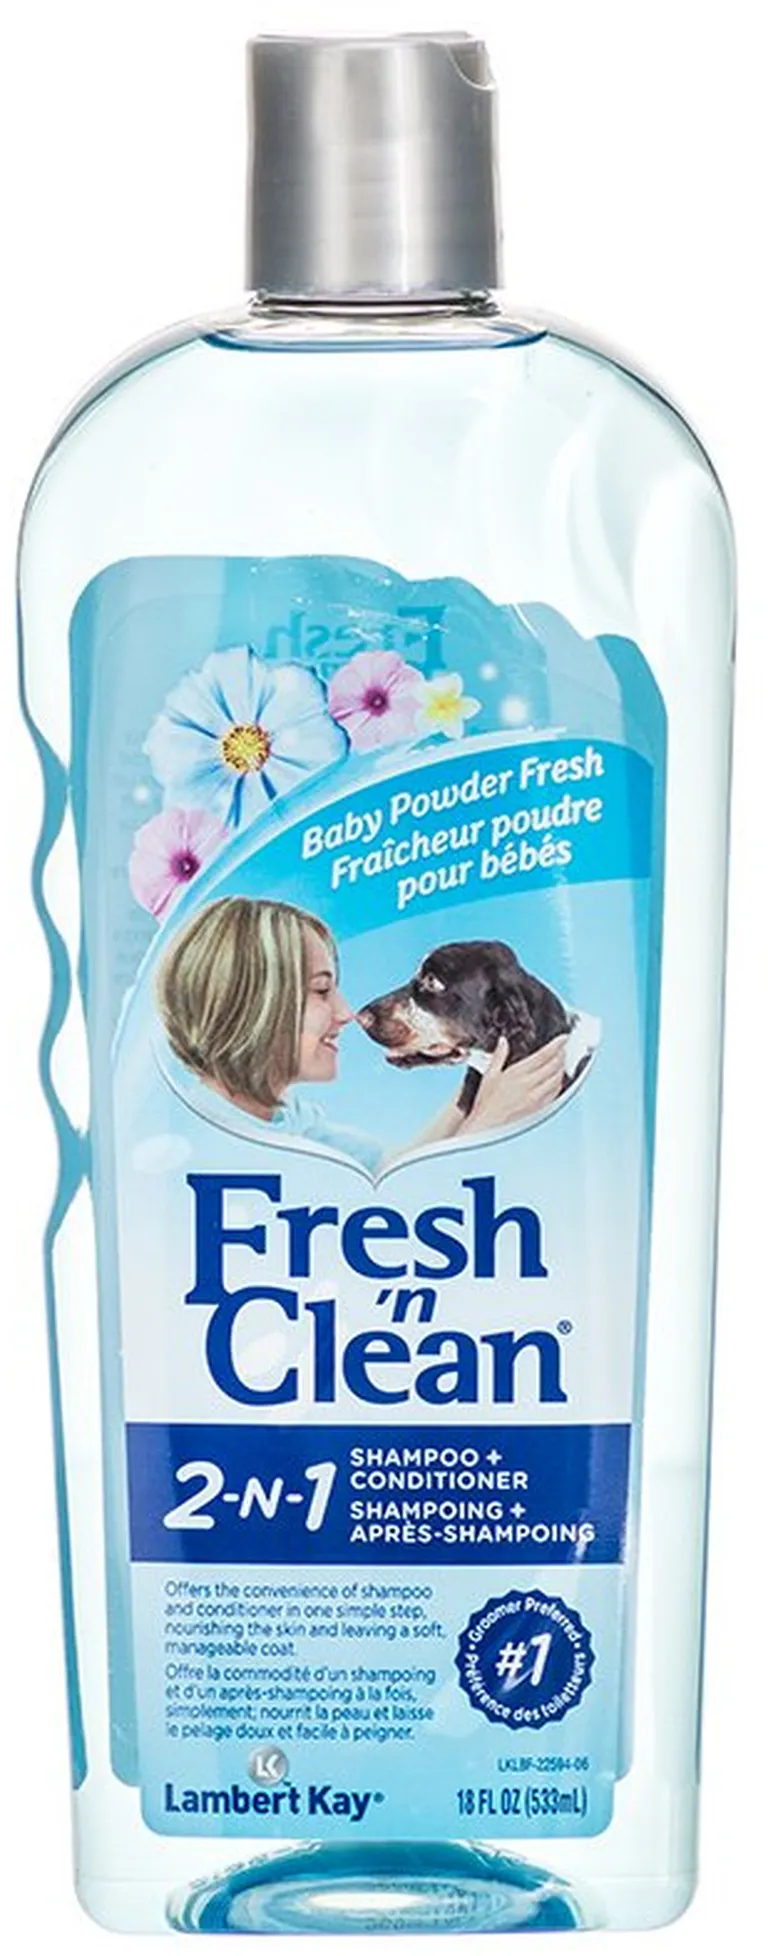 Fresh n Clean 2 in 1 Shampoo and Conditioner Photo 2